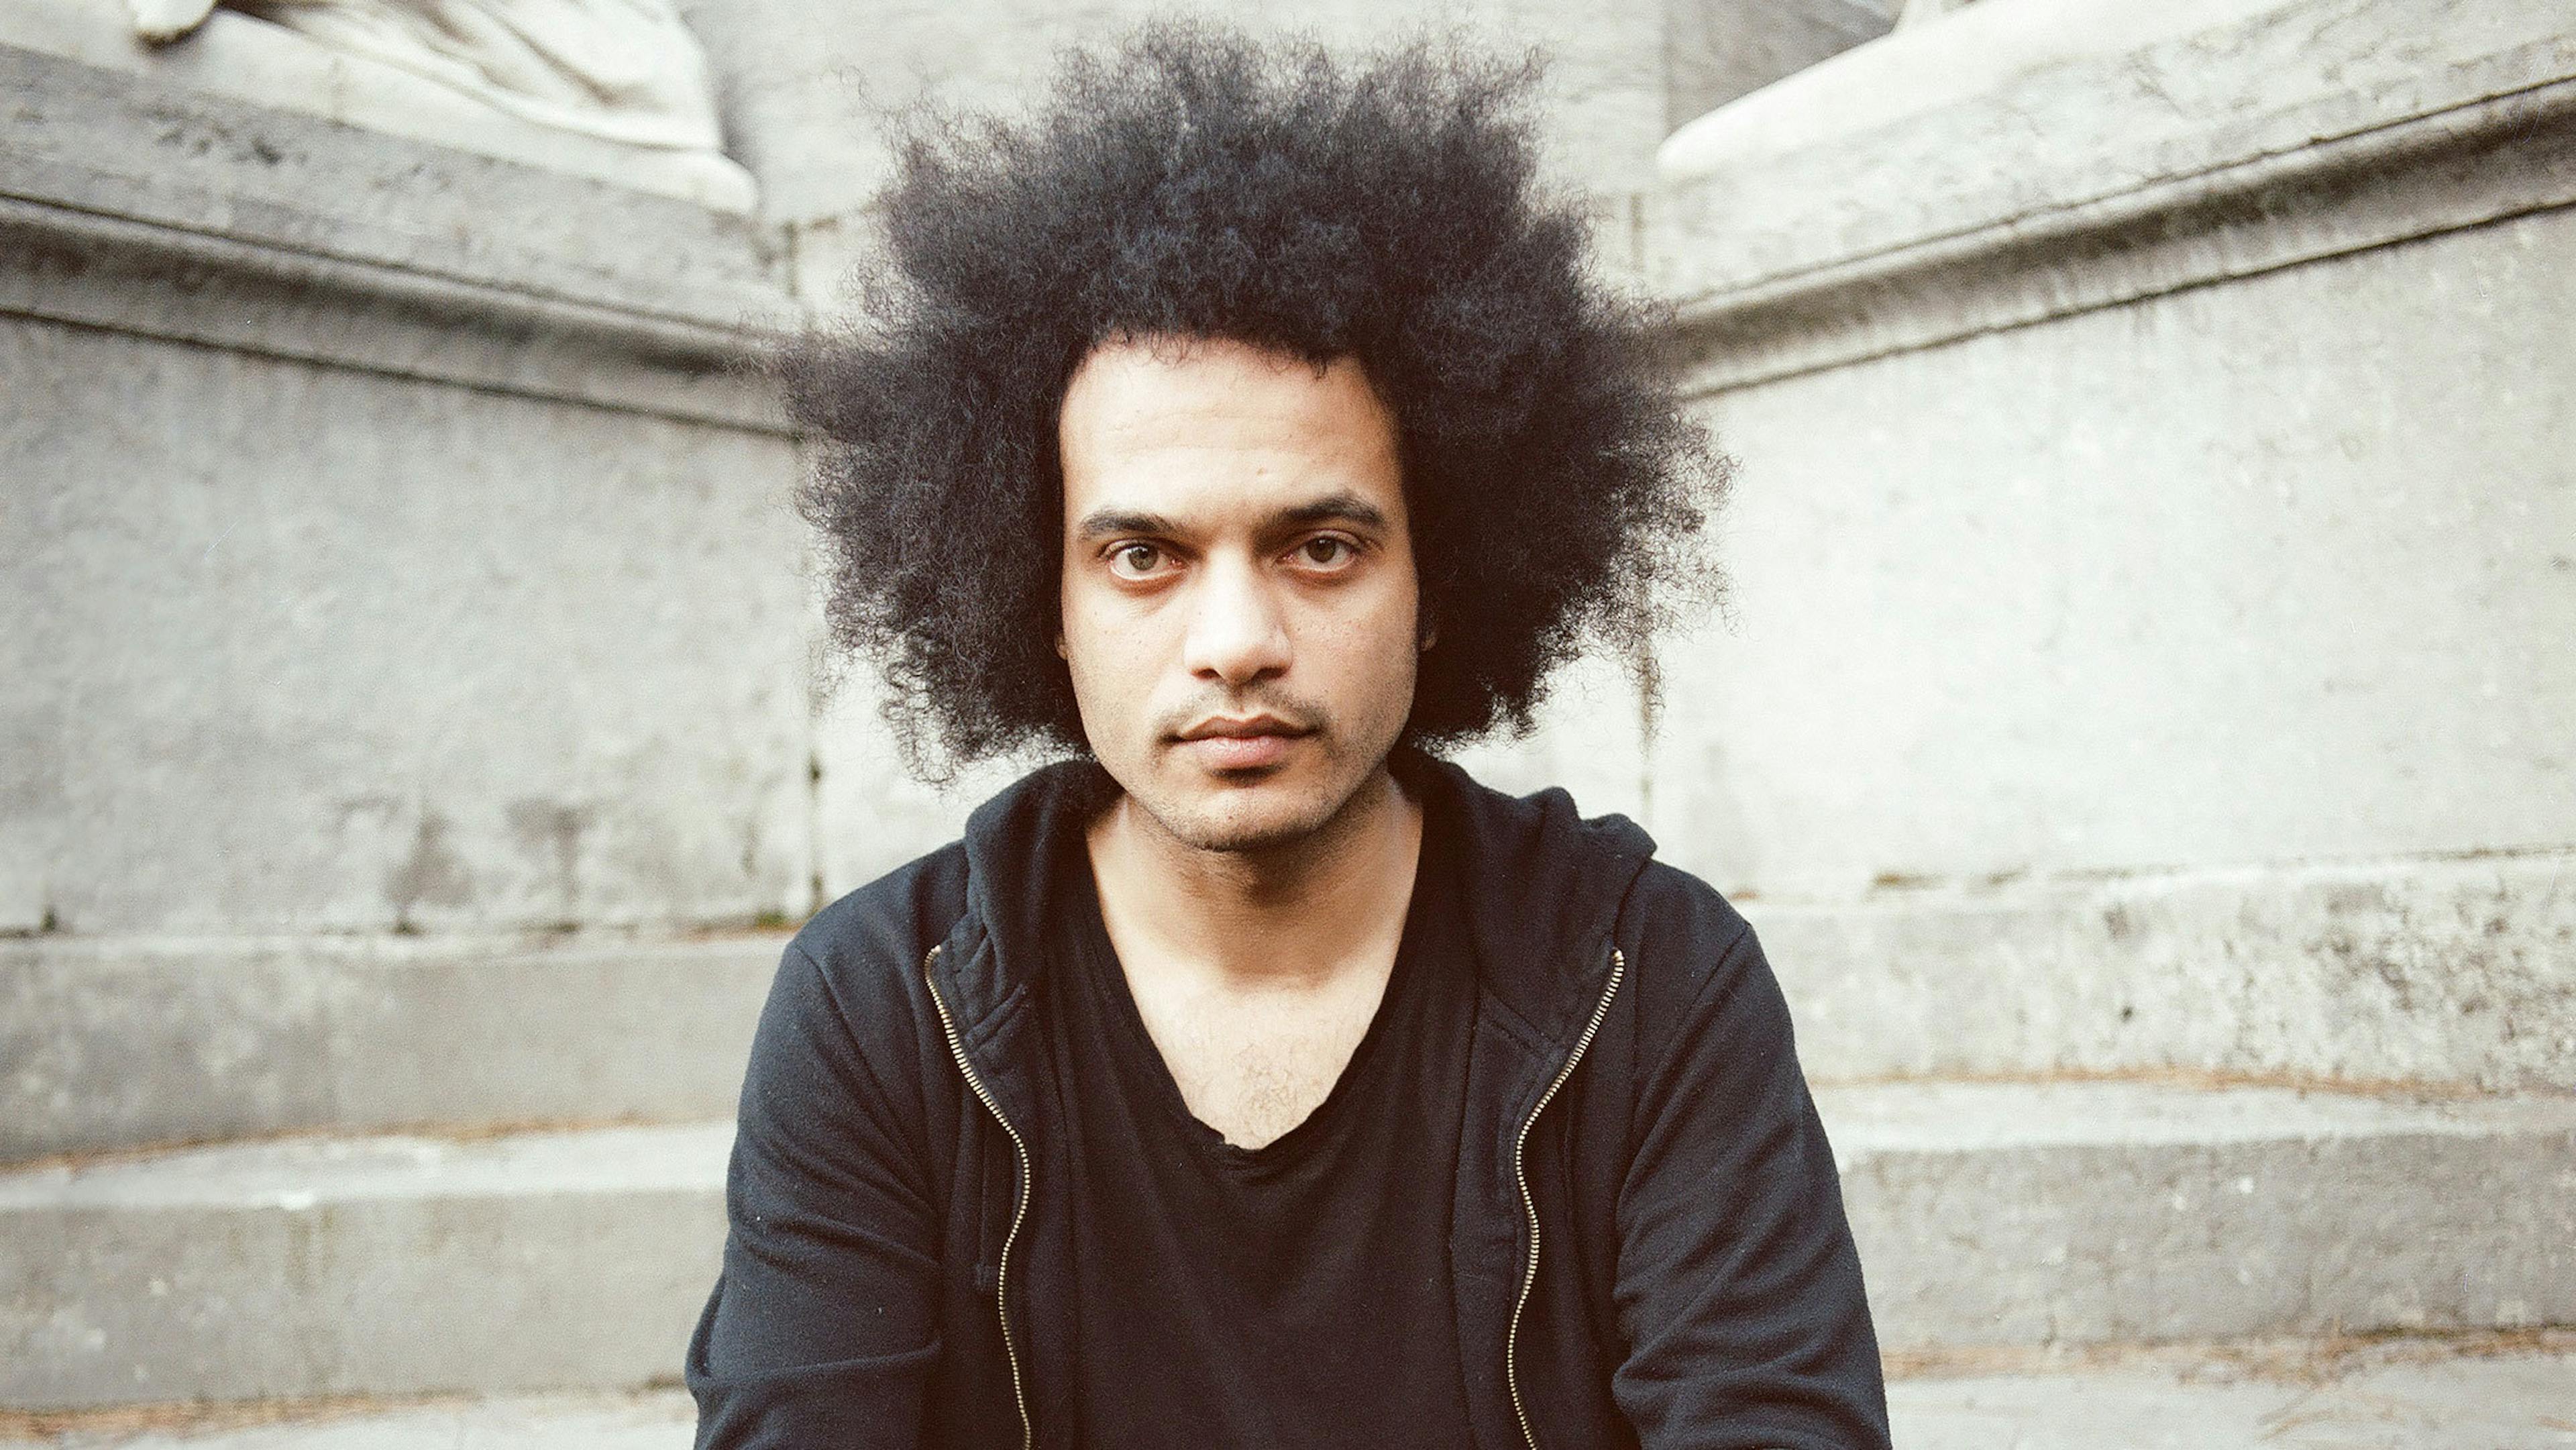 Zeal & Ardor's Manuel Gagneux: "We Need To Boringly Homogenise Rather Than Spectacularly Separate"